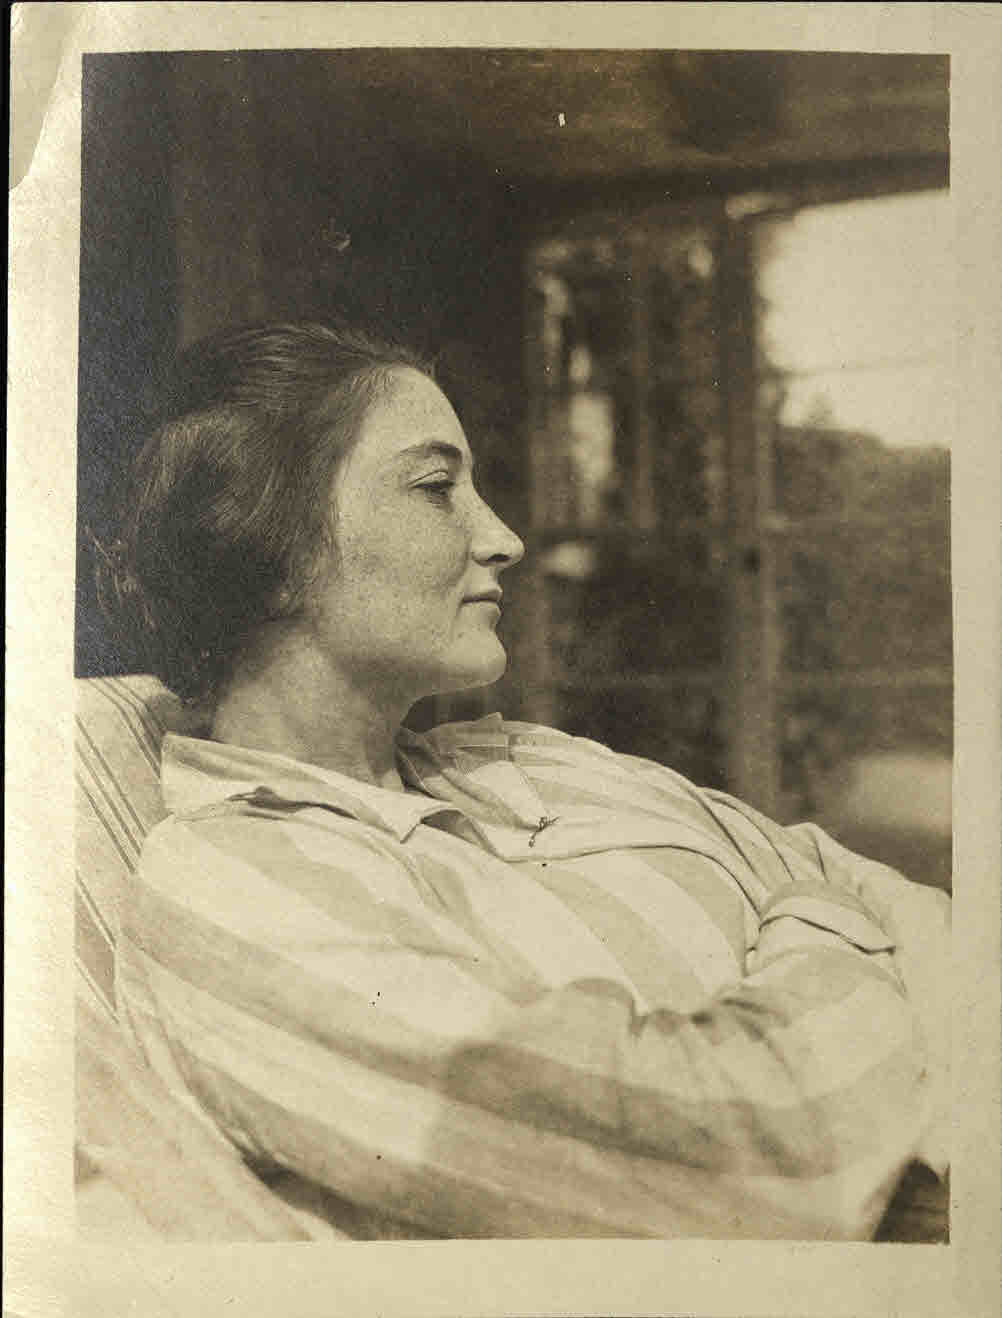 Photograph of Eileen Younghusband